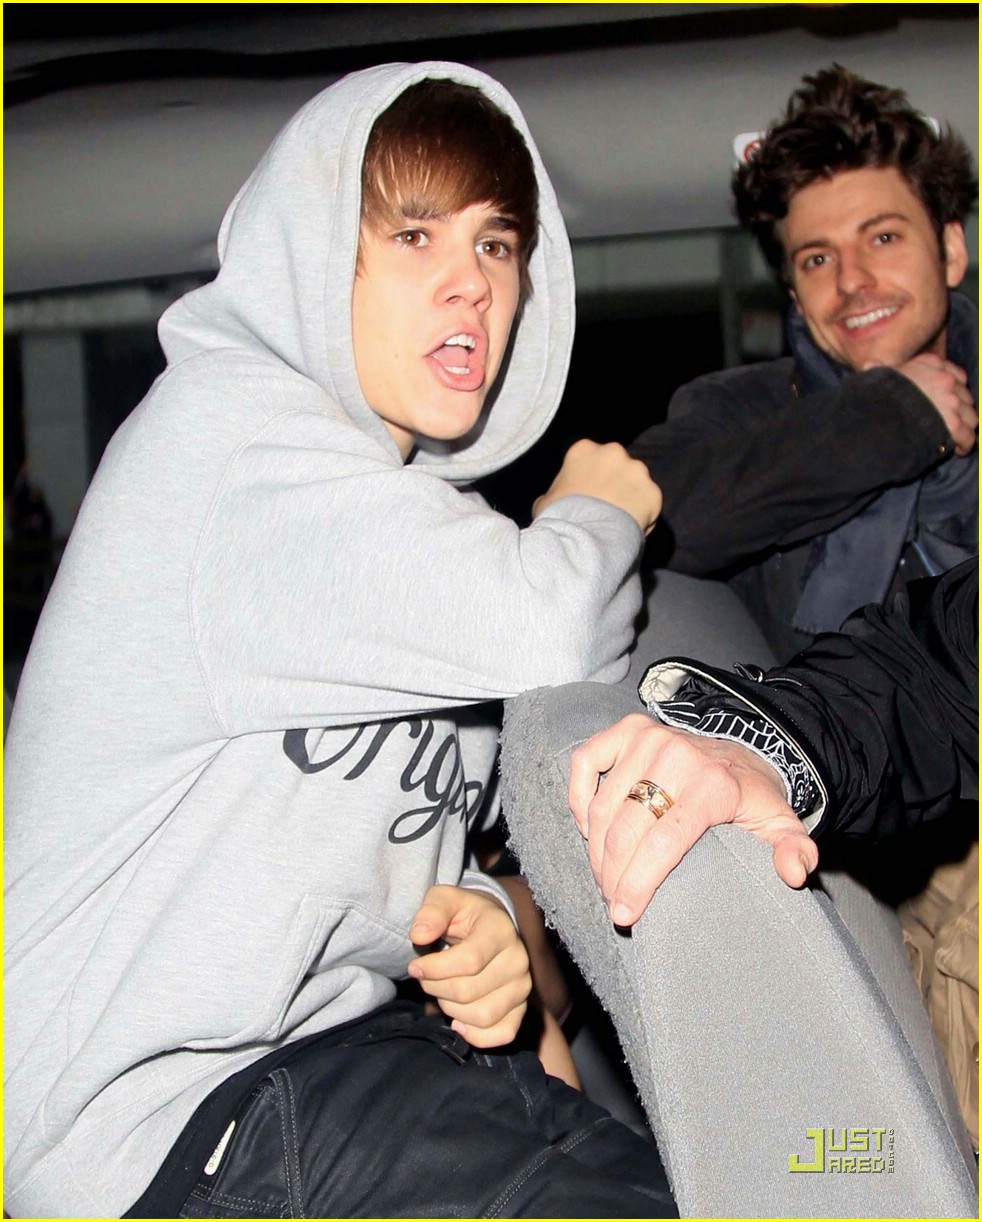 The Diary of Justin Bieber Premieres Sunday! | Photo 363104 - Photo ...